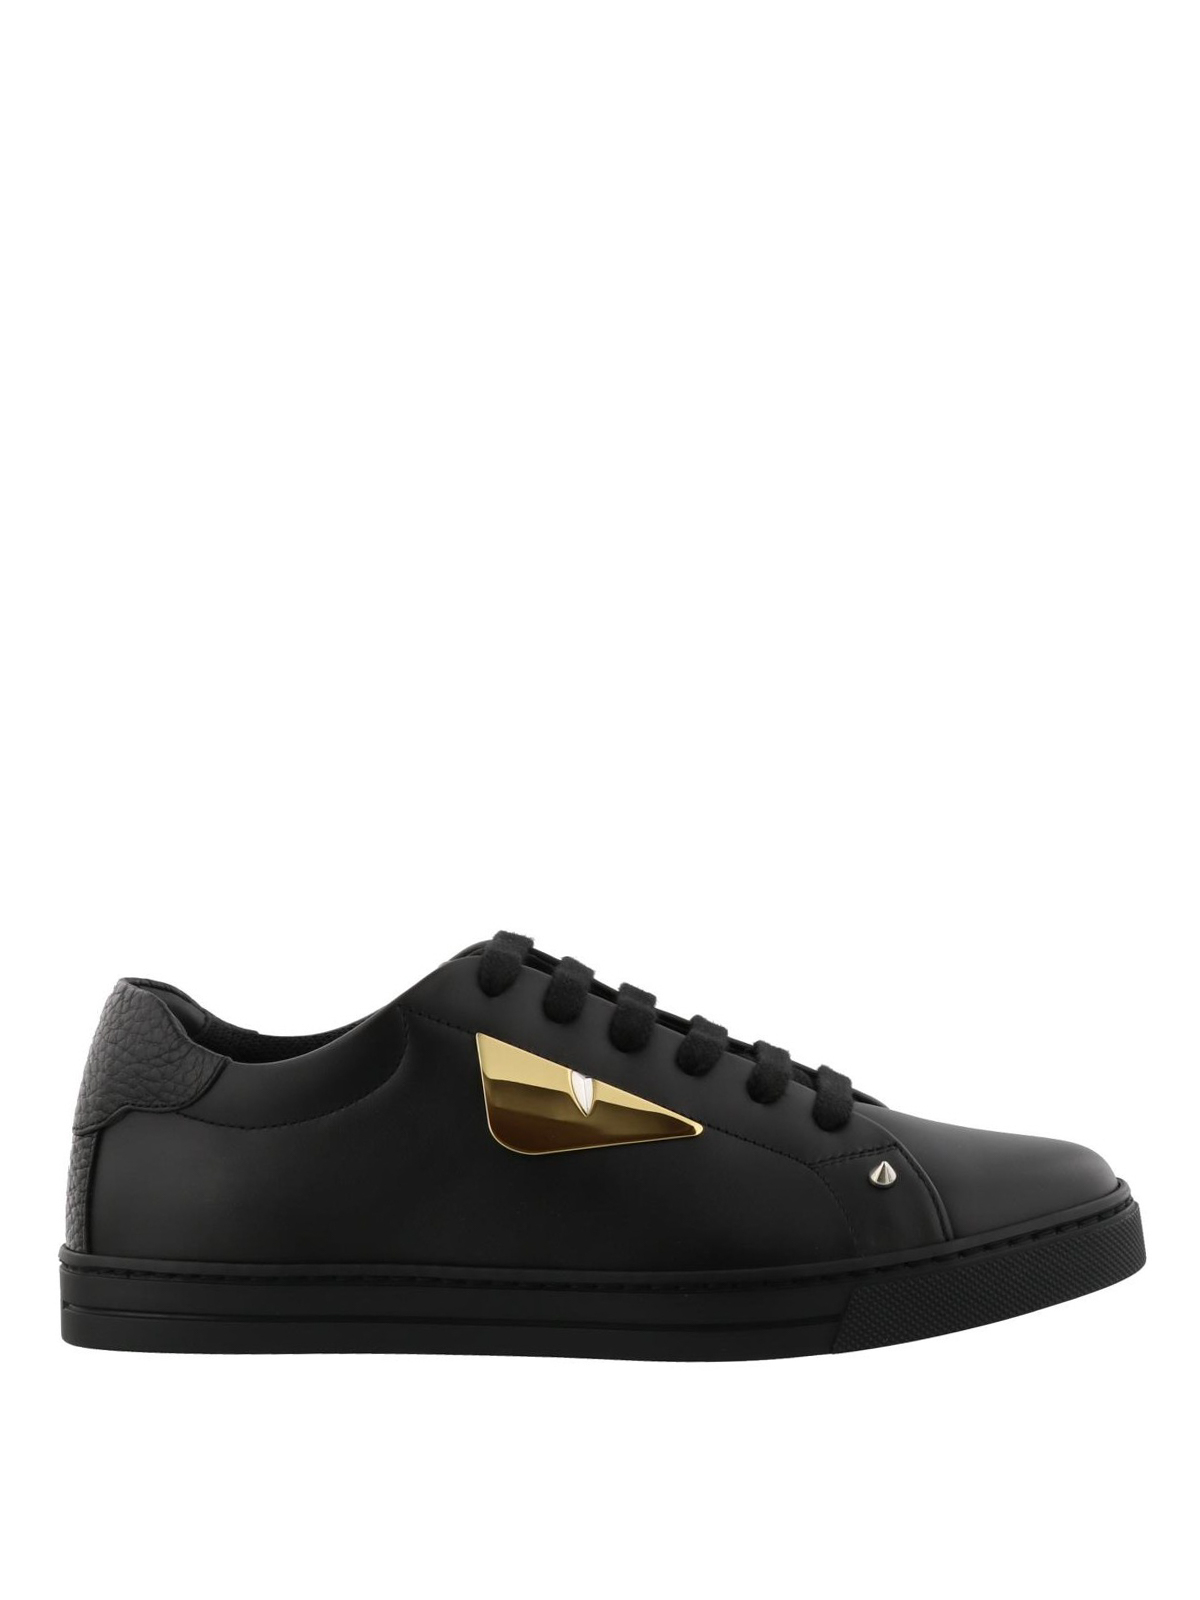 Bag Bugs studded black leather sneakers 